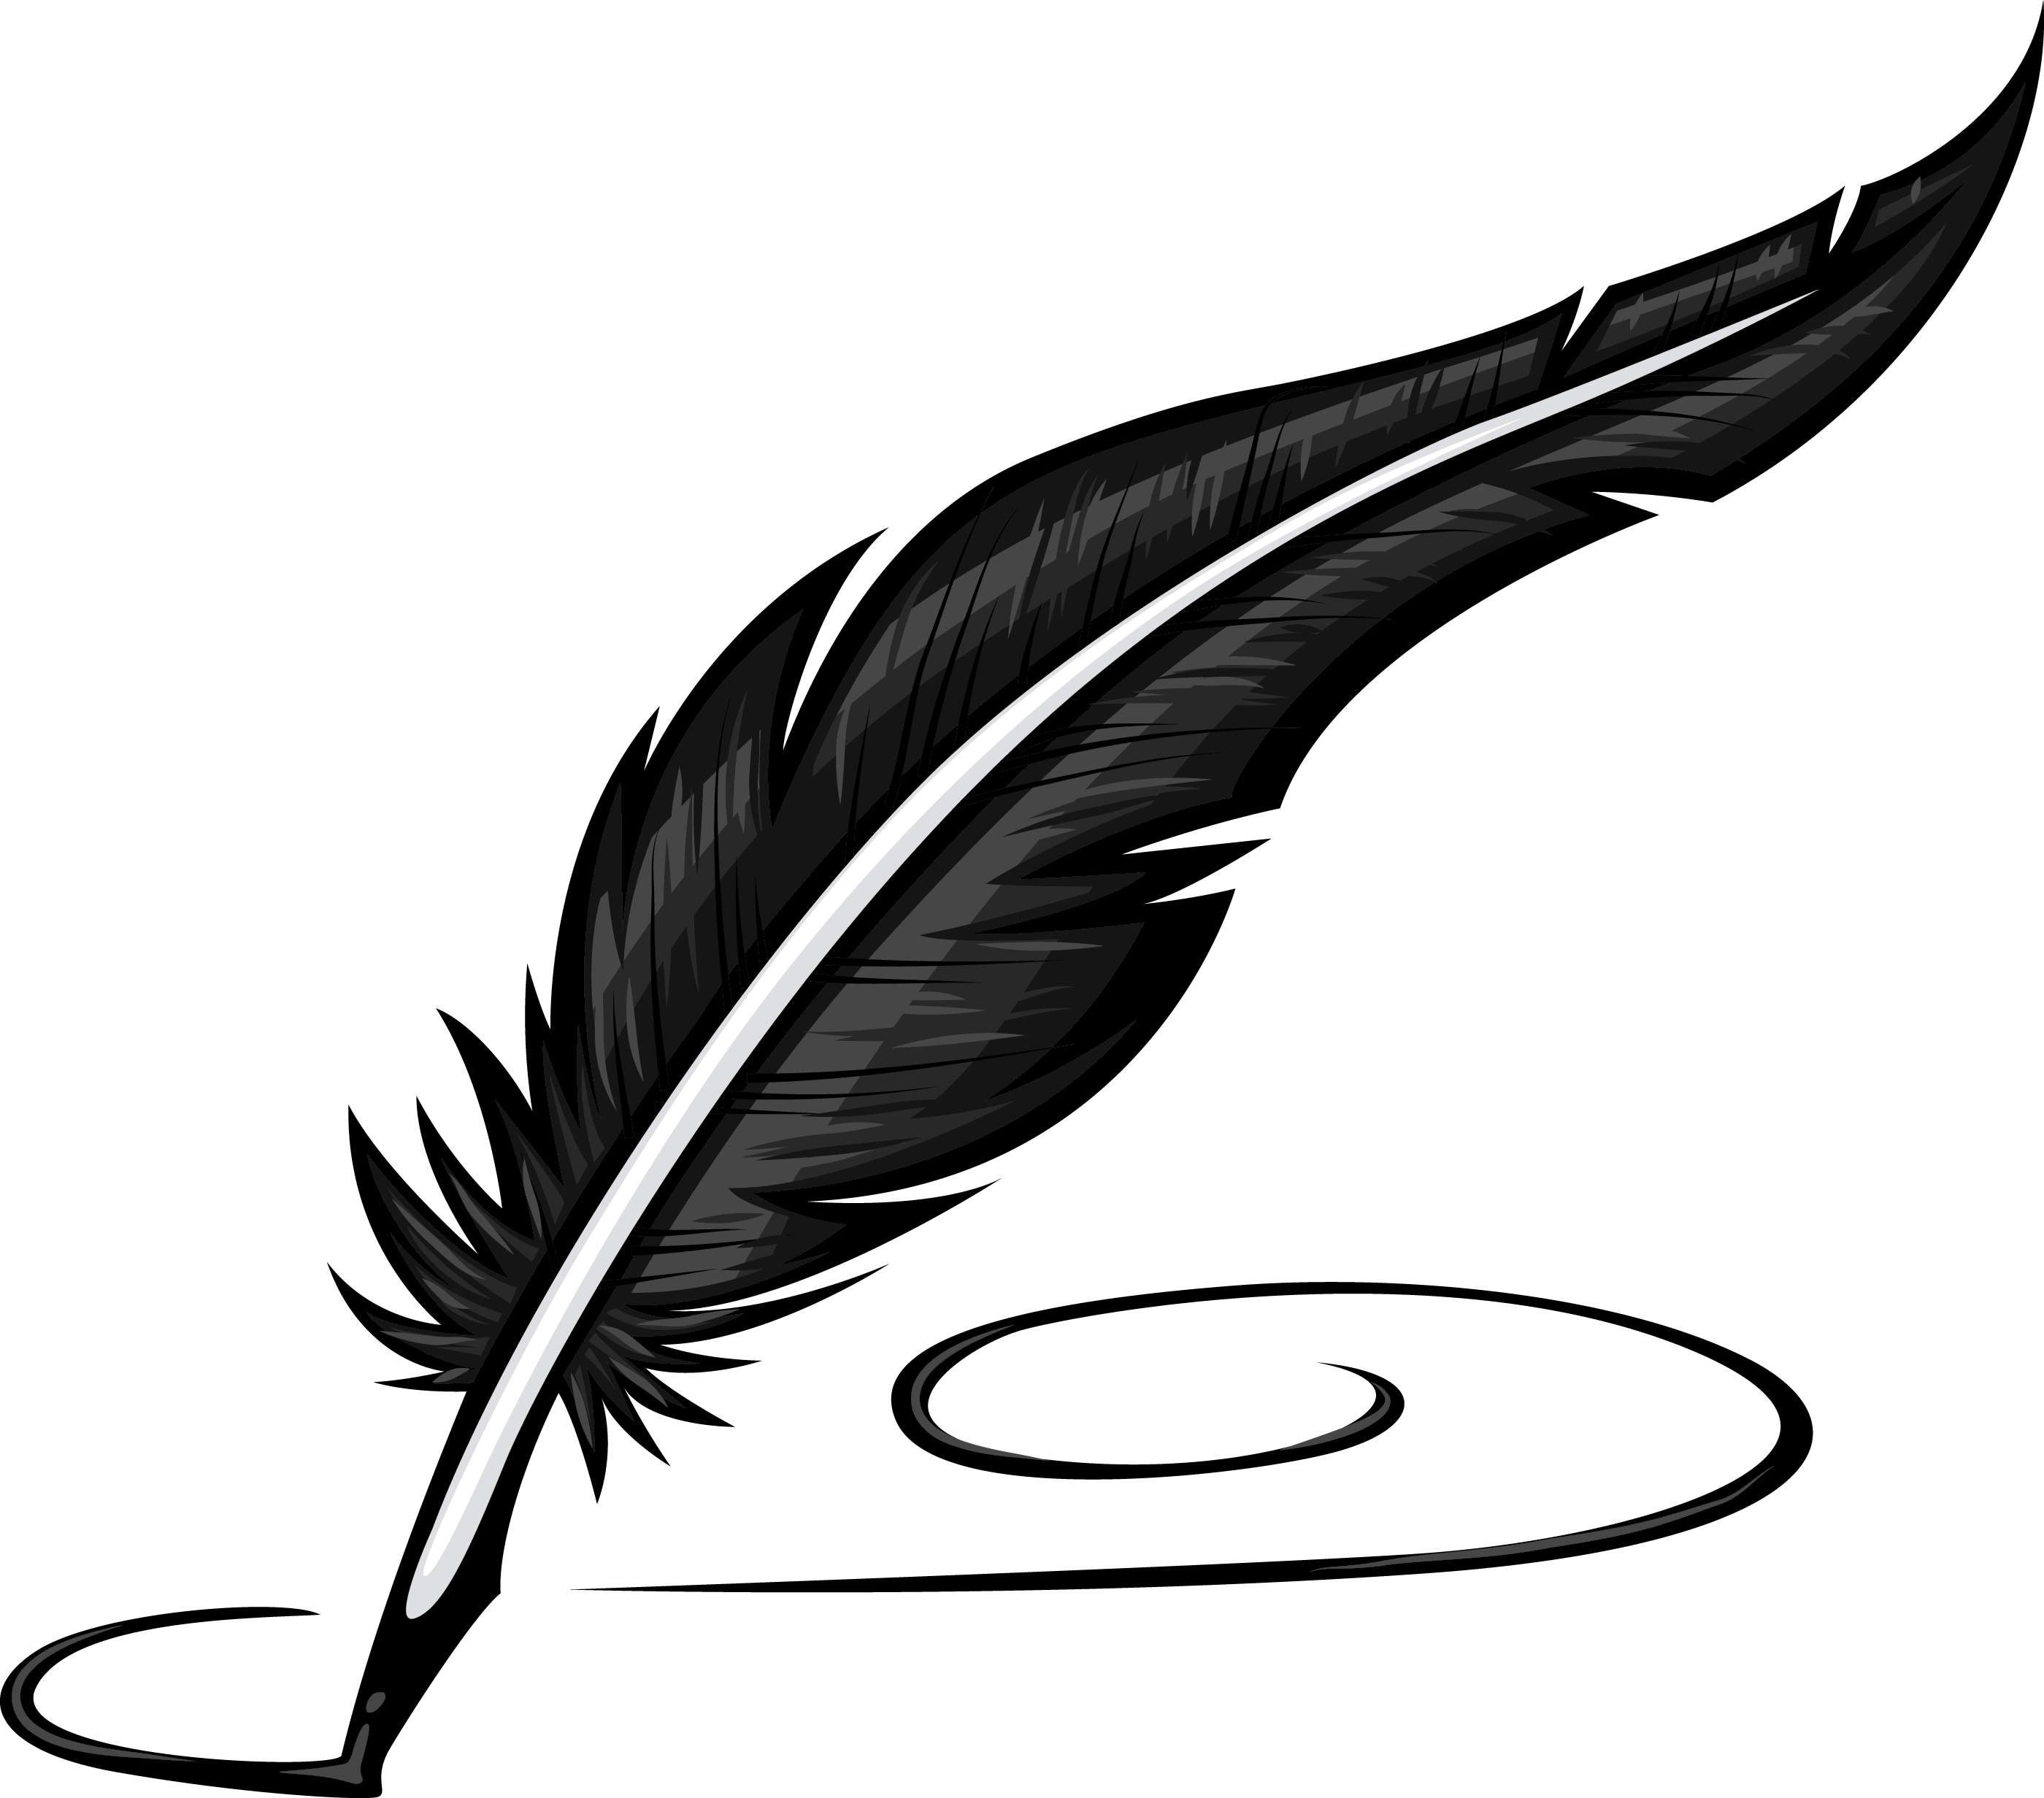 Feather quill pen clip art free vector image 